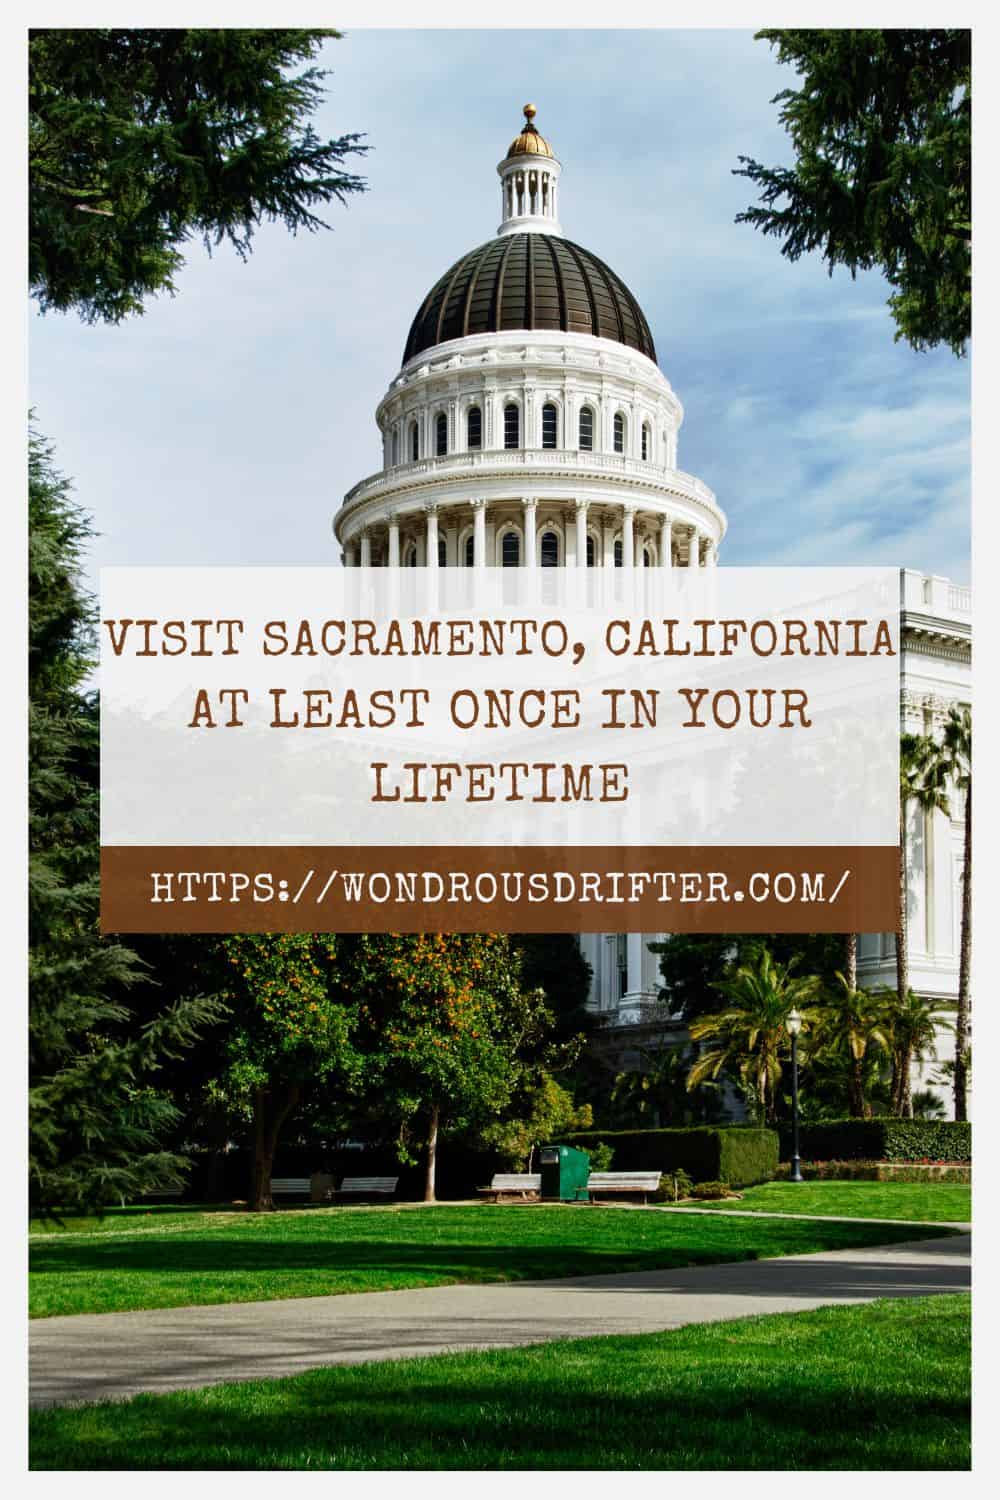 Visit Sacramento California at least once in your lifetime